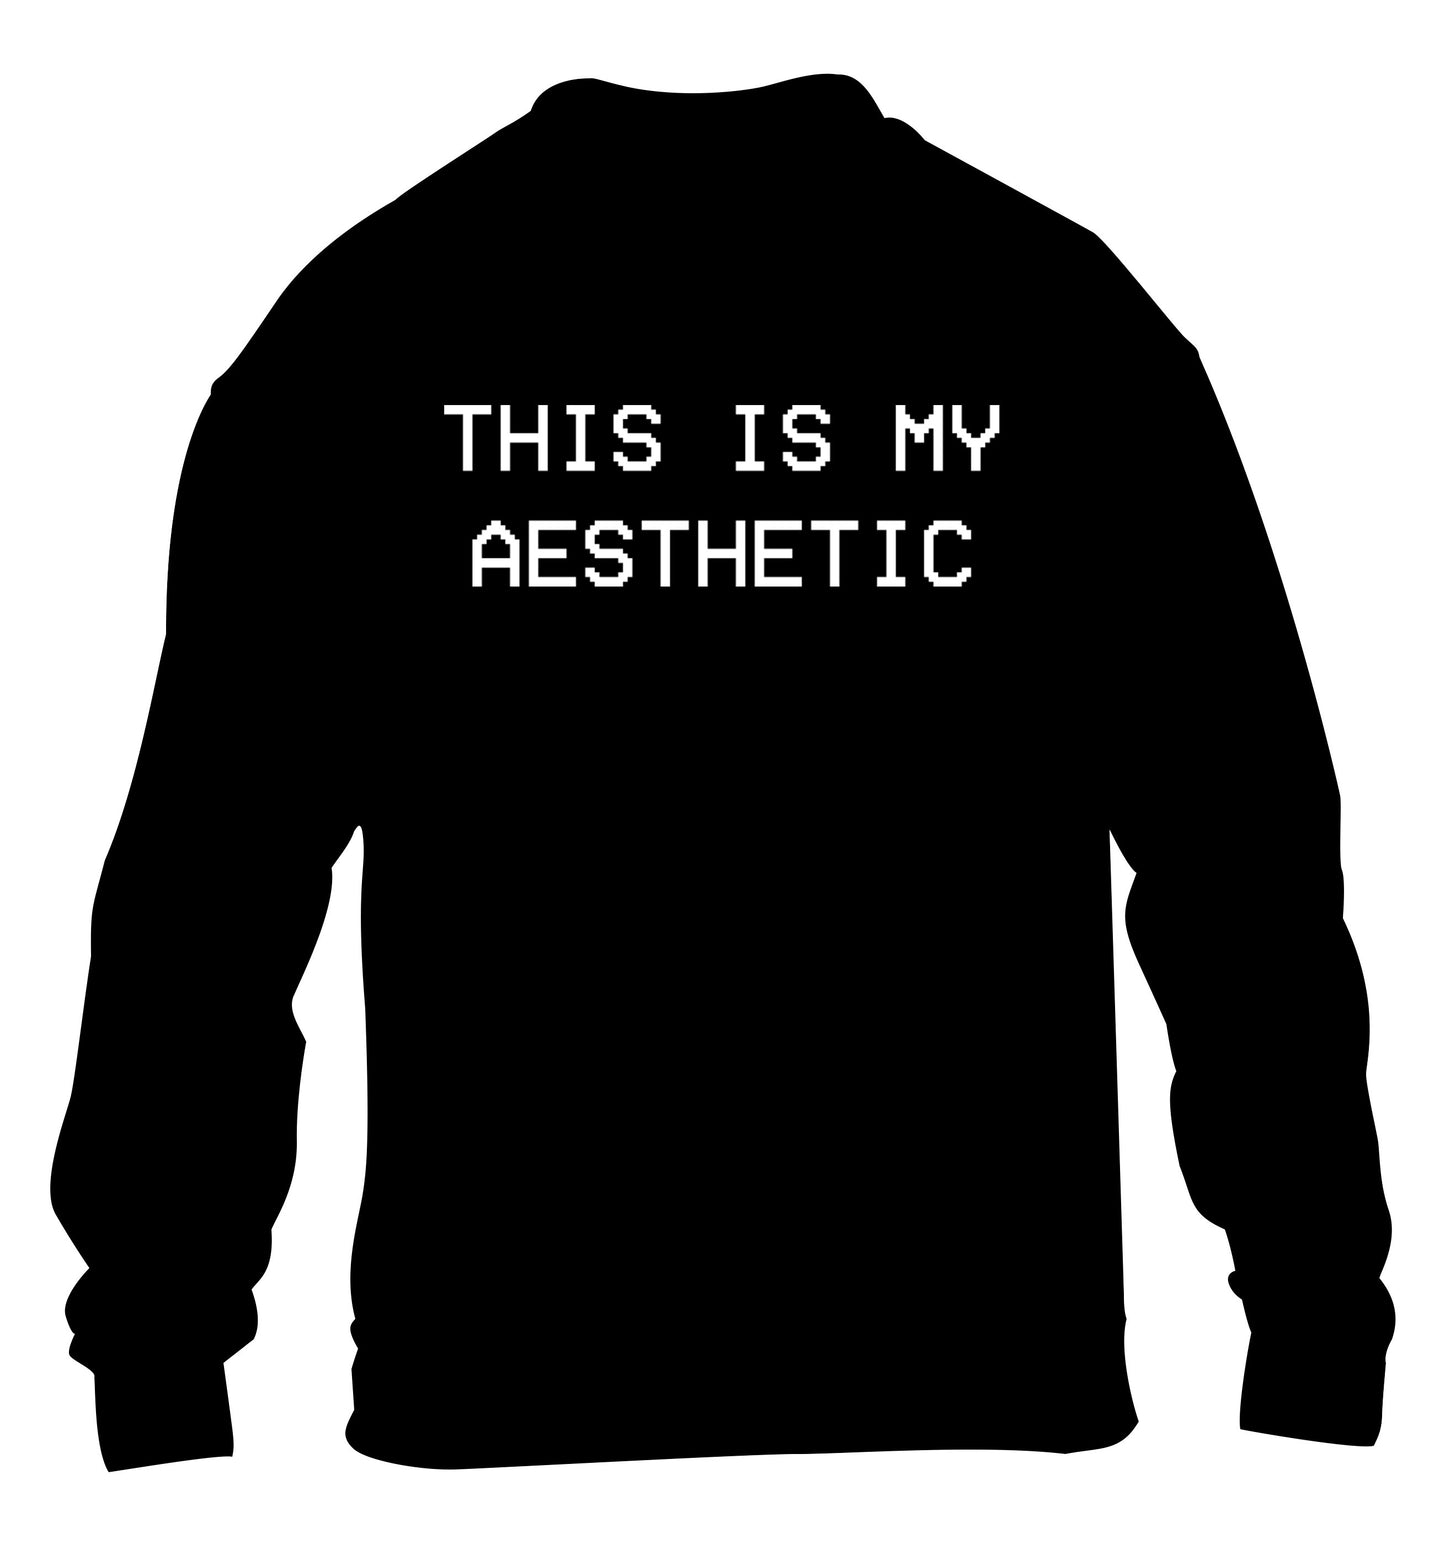 This is my aesthetic children's black sweater 12-14 Years